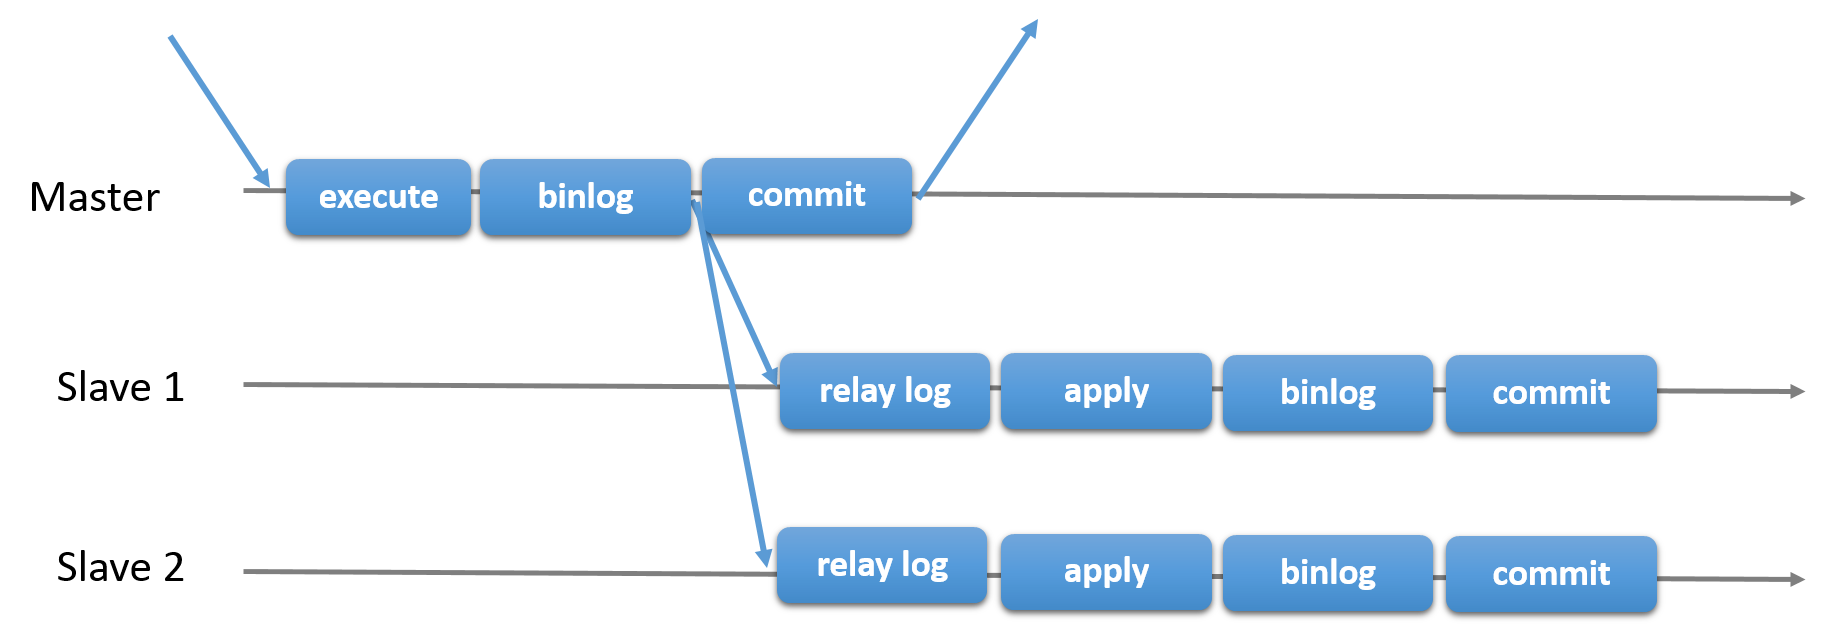 A transaction received by the master is executed, written to the binary log, then committed, and a response is sent to the client application. The record from the binary log is sent to the relay logs on Slave 1 and Slave 2 before the commit takes place on the master. On each of the slaves, the transaction is applied, written to the slave's binary log, and committed. The commit on the master and the commits on the slaves are all independent and asynchronous.